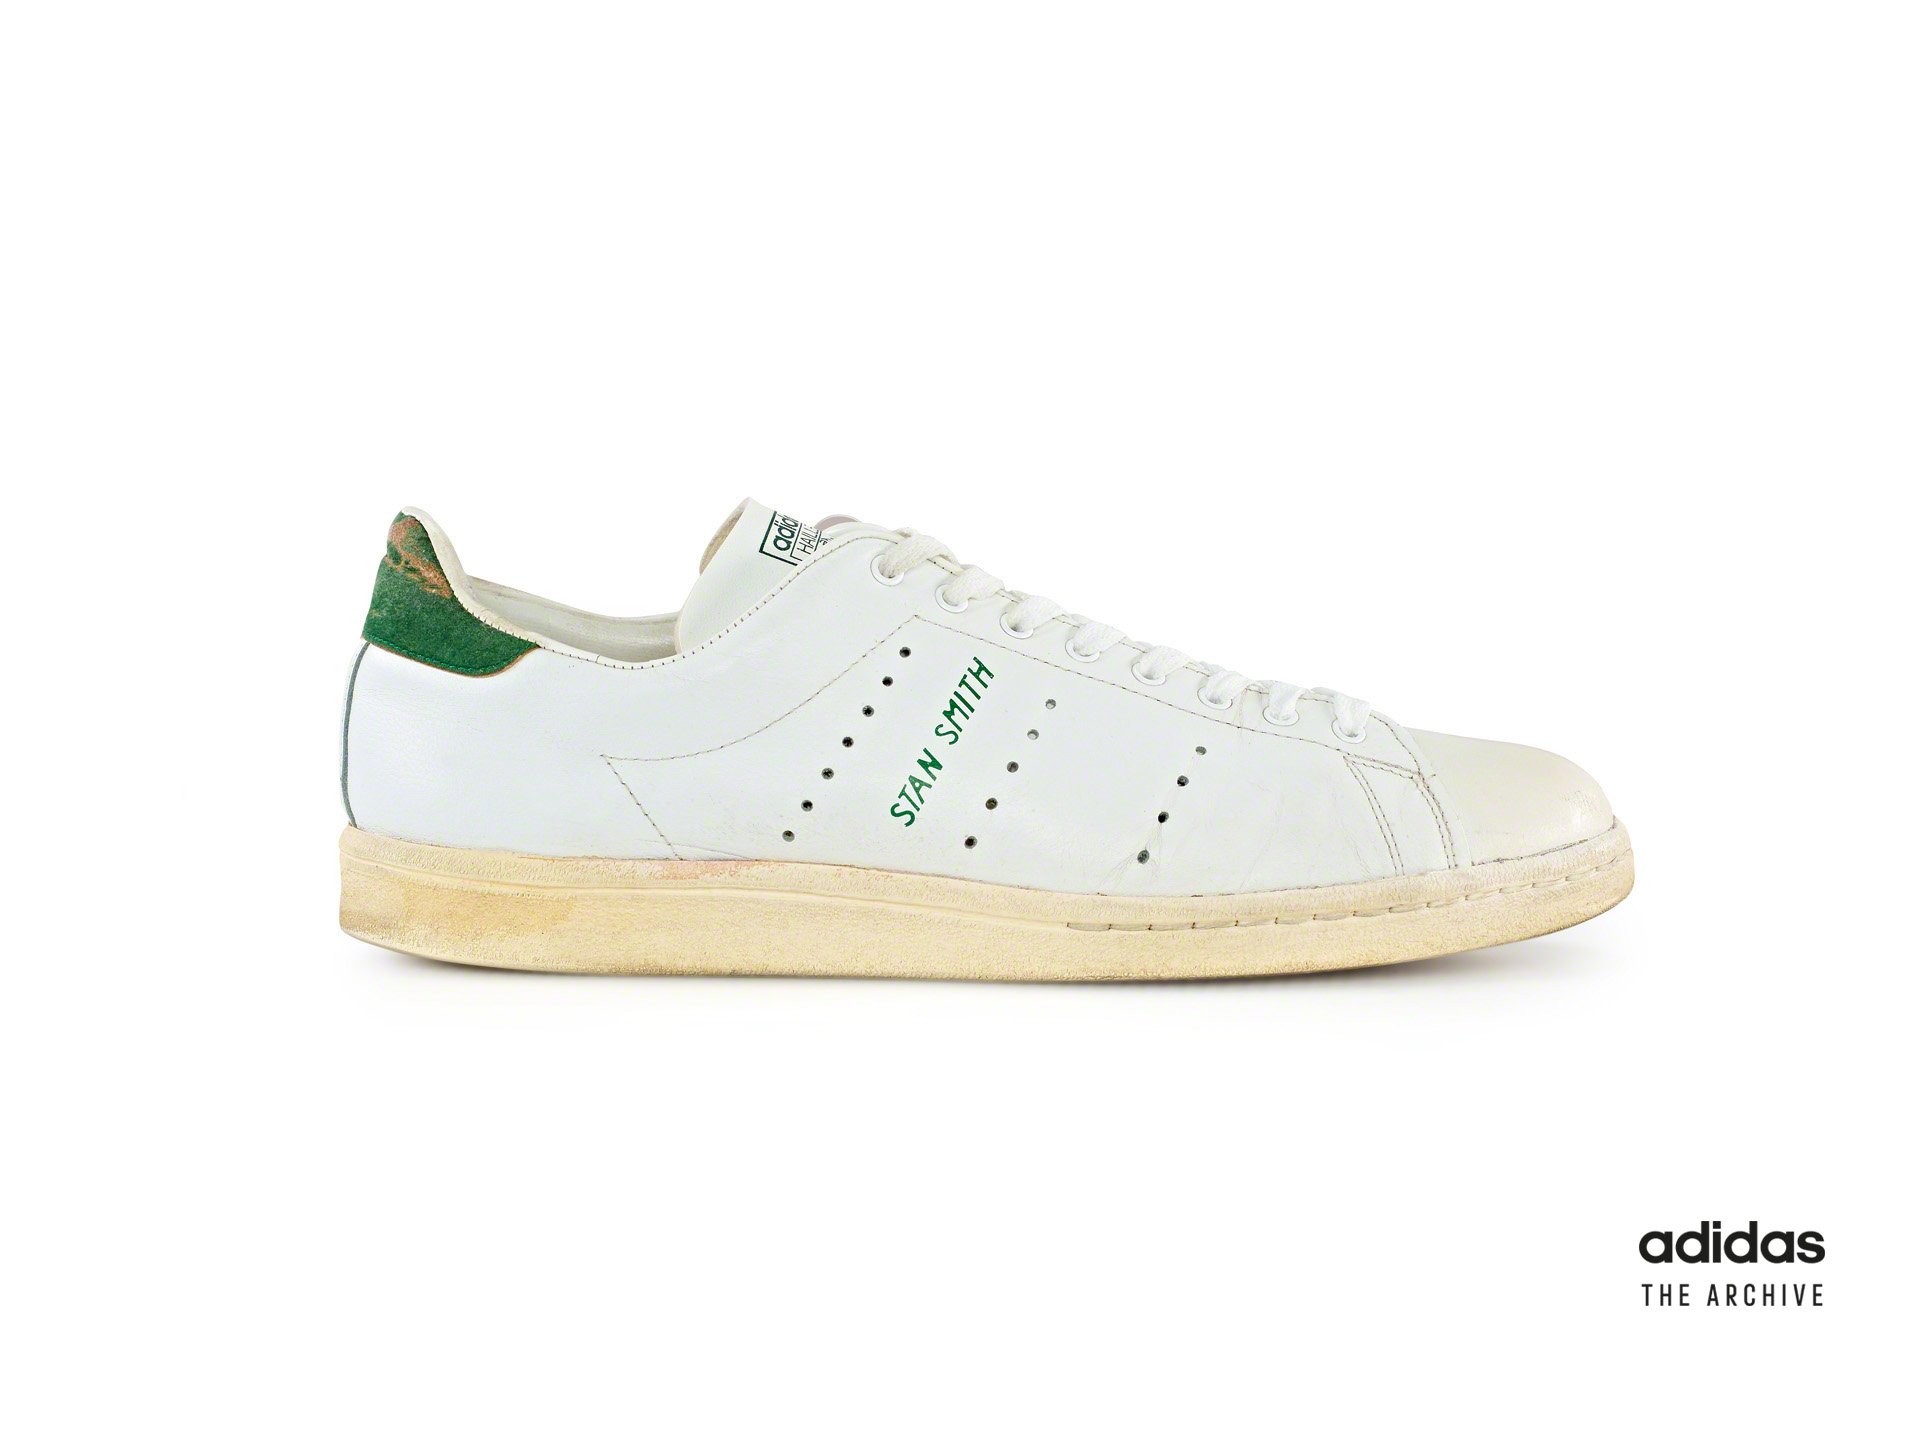 adidas on Twitter: "1973, Stan Smith​ ​ The '70s laid the foundation for streetwear staples we love today, like the white tennis shoe named after @stansmithonline, the tennis legend who helped